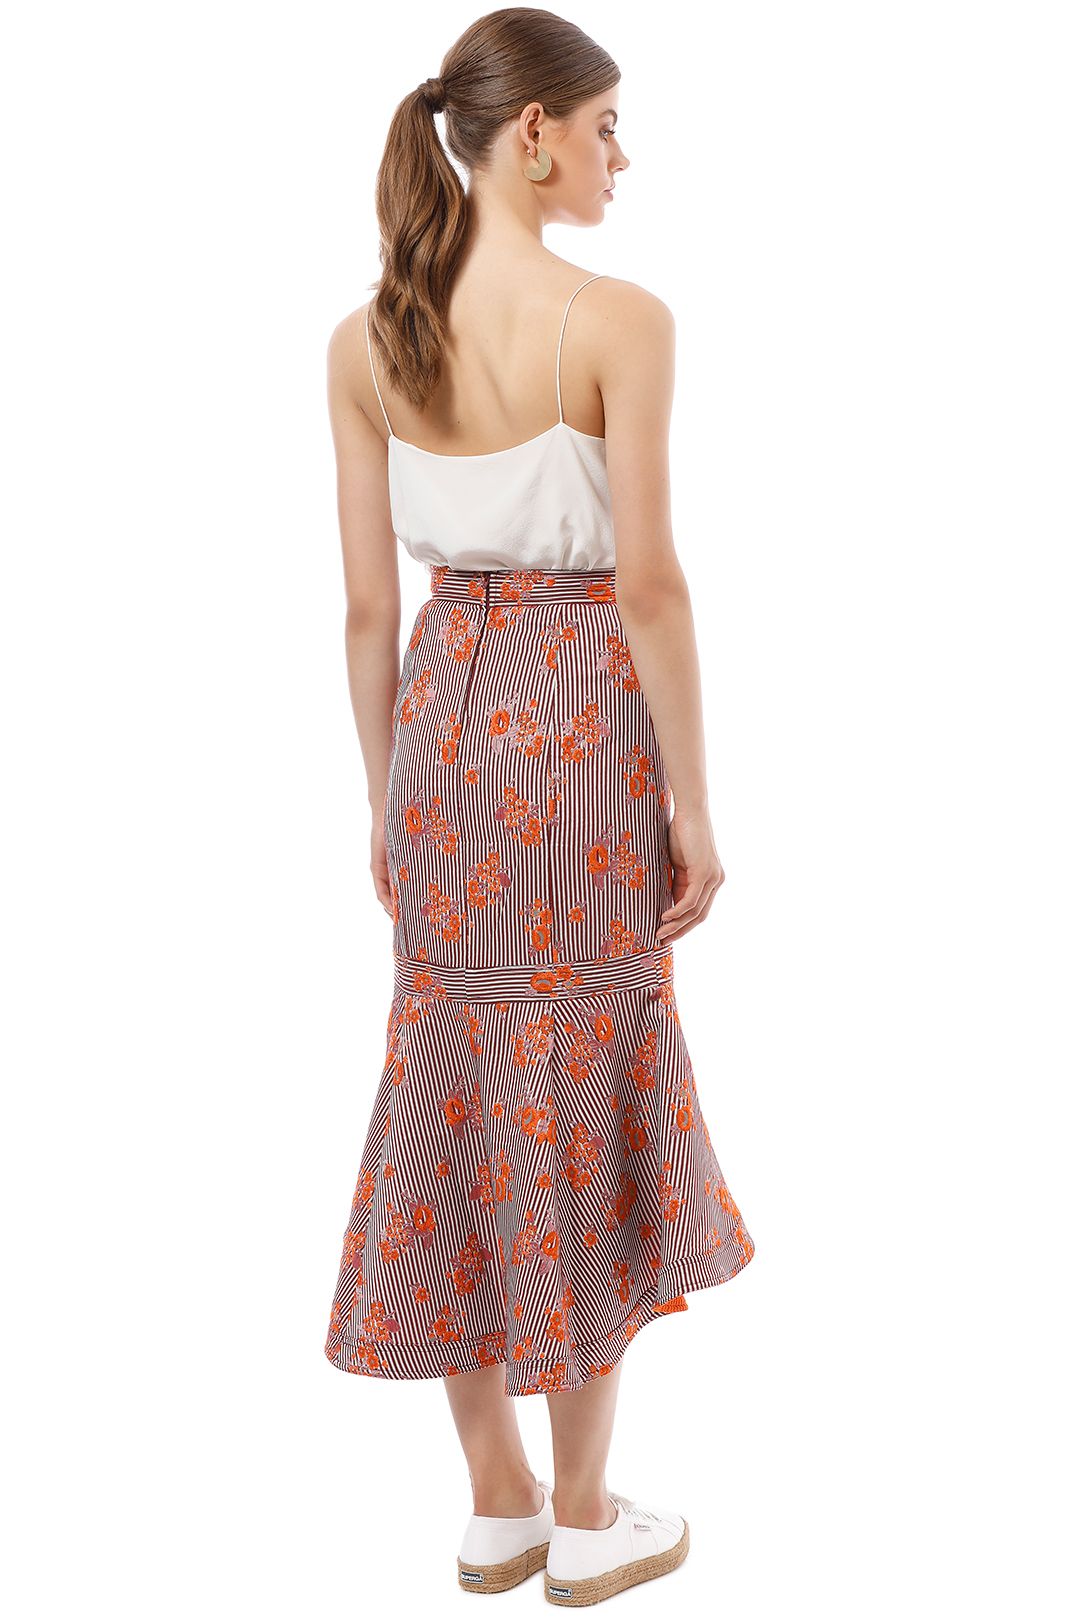 CMEO Collective - Fixation Skirt - Floral - Back